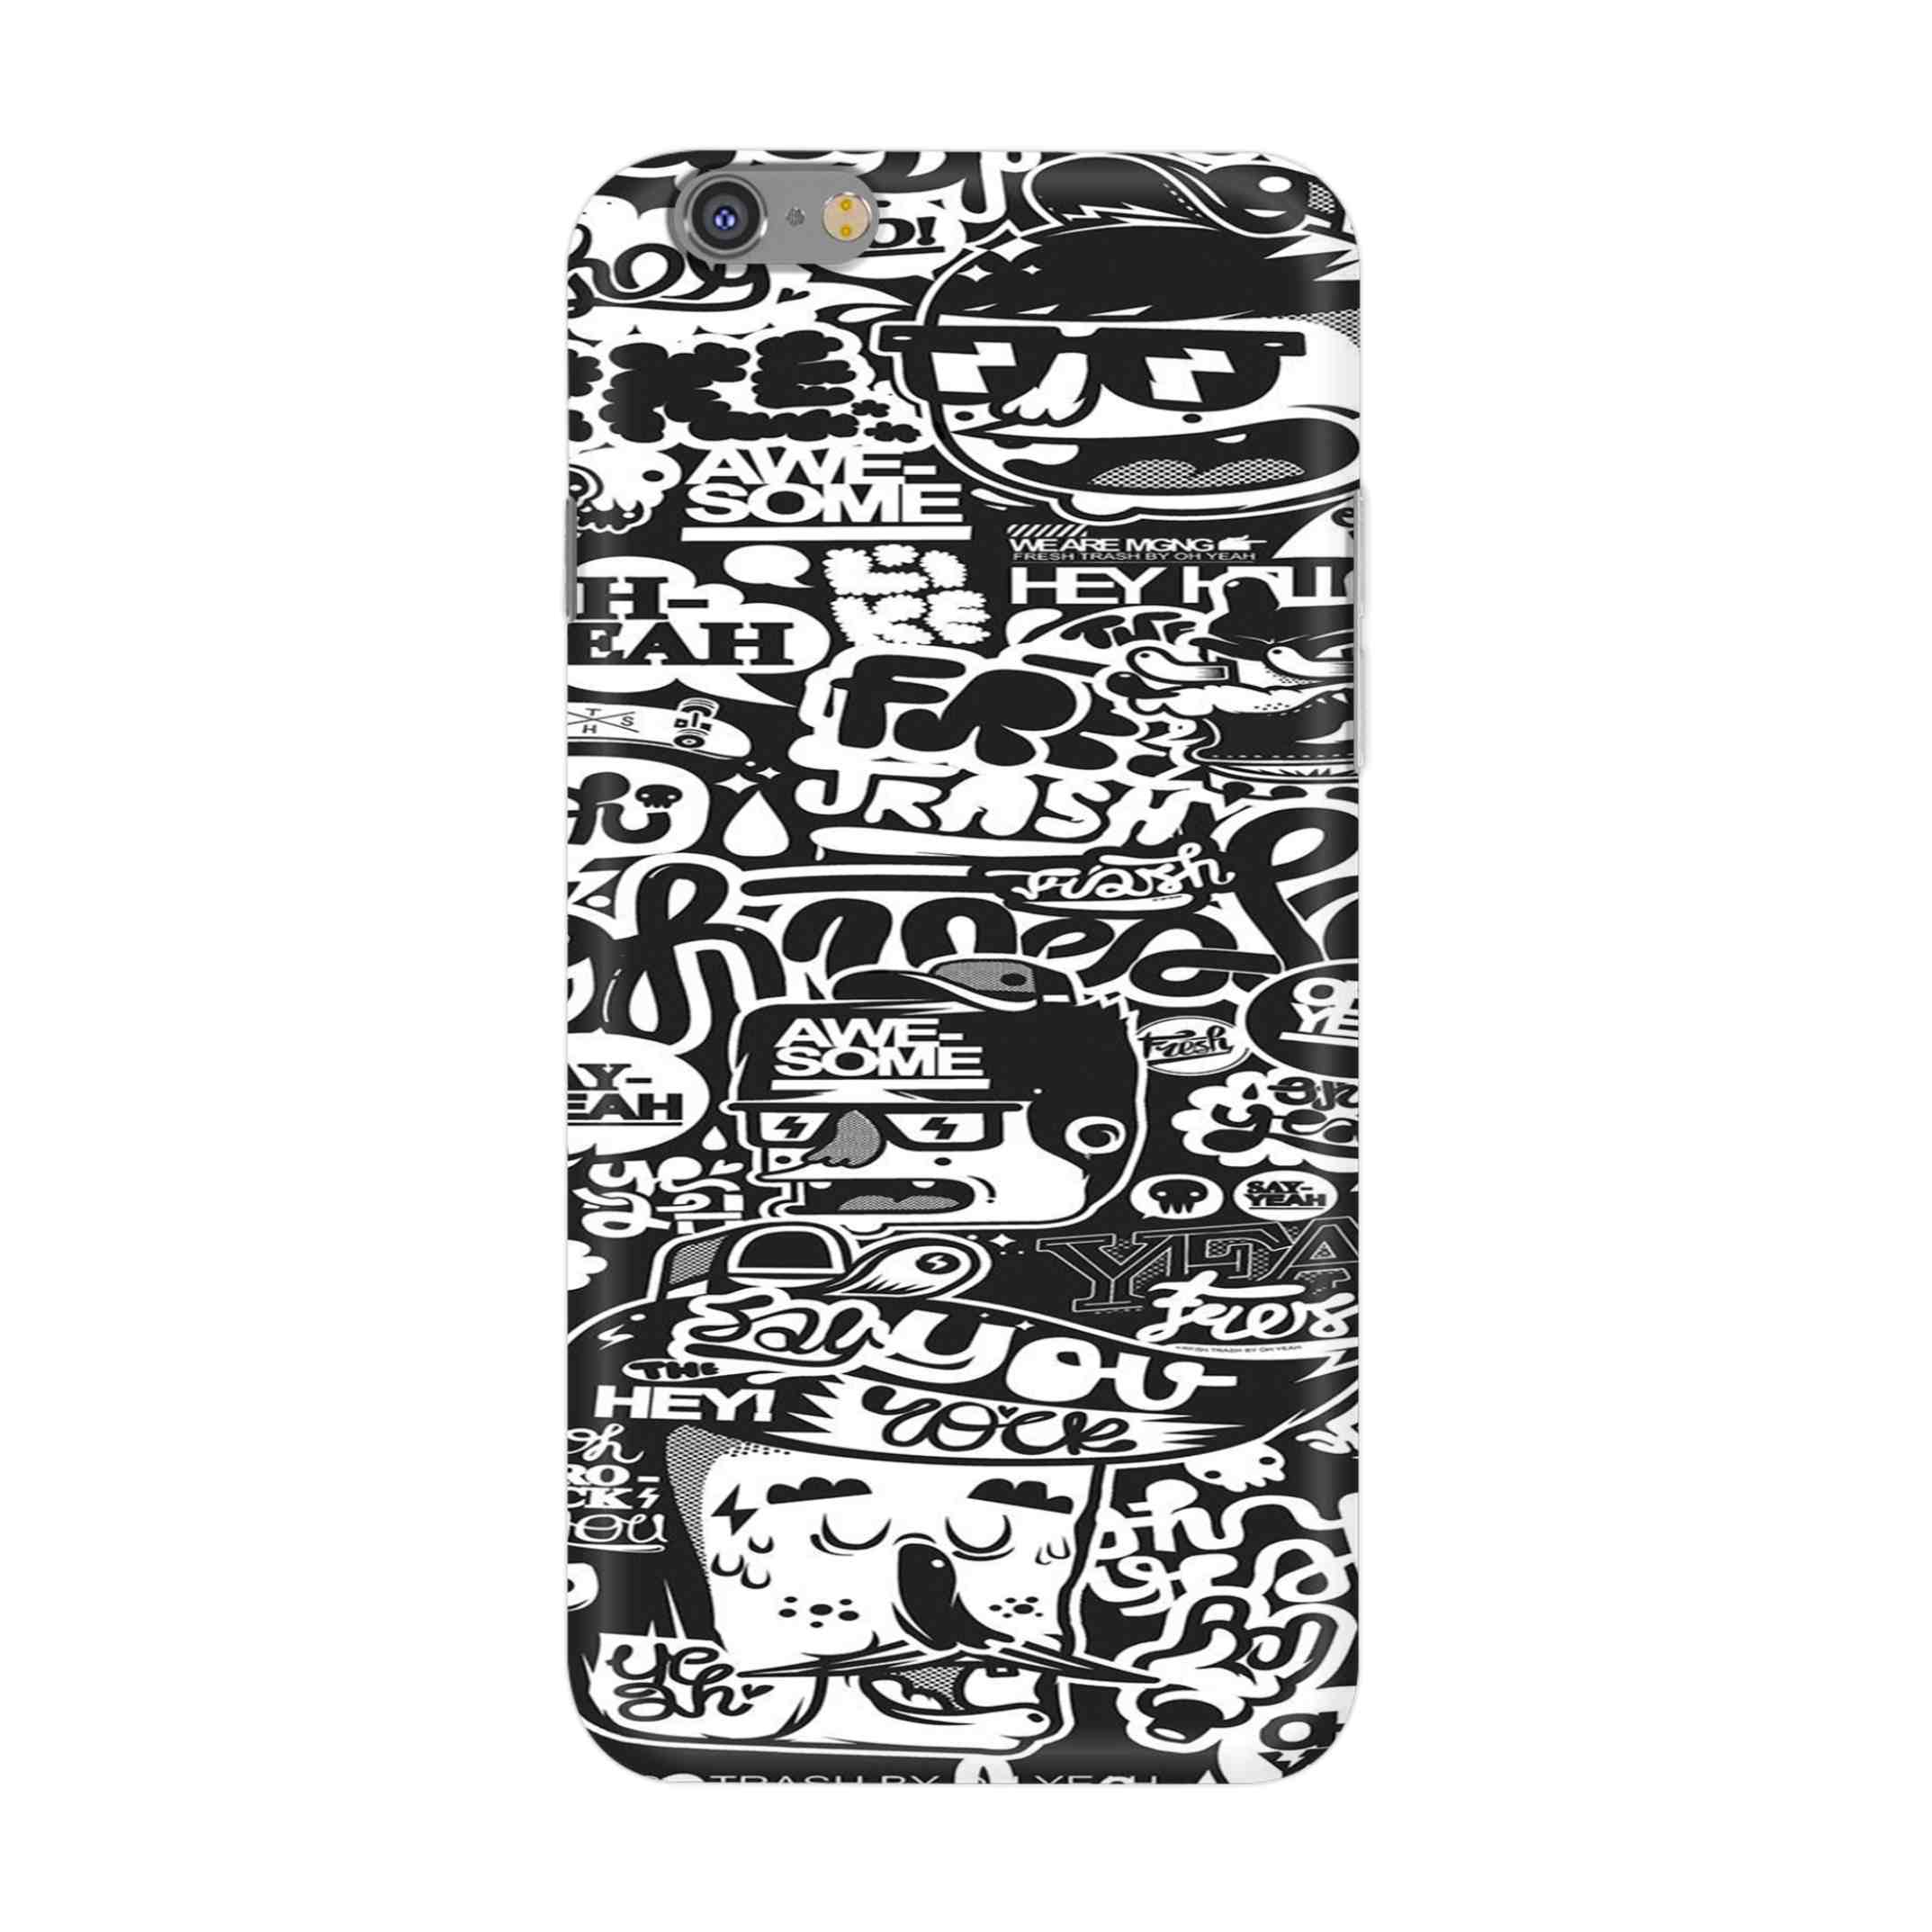 Buy Awesome Hard Back Mobile Phone Case/Cover For iPhone 6 / 6s Online